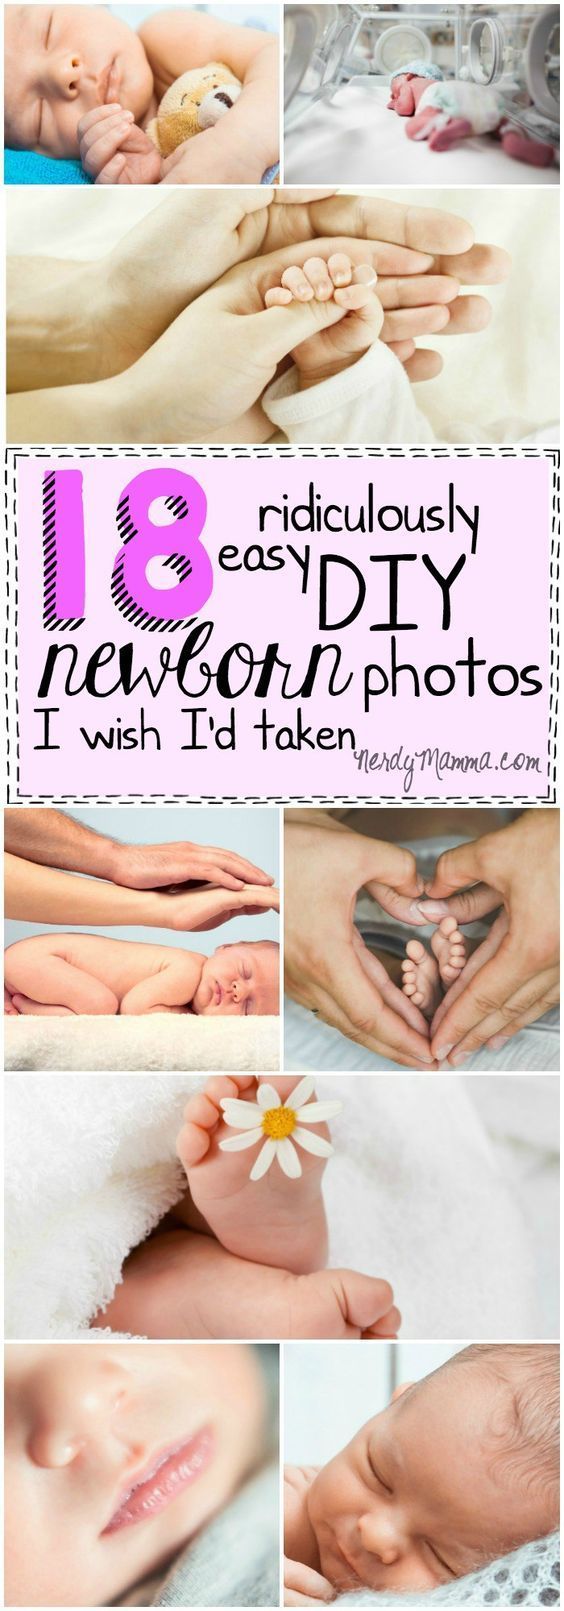 I love these easy ideas for taking baby photos at home! I wish I’d done every one of them, too!